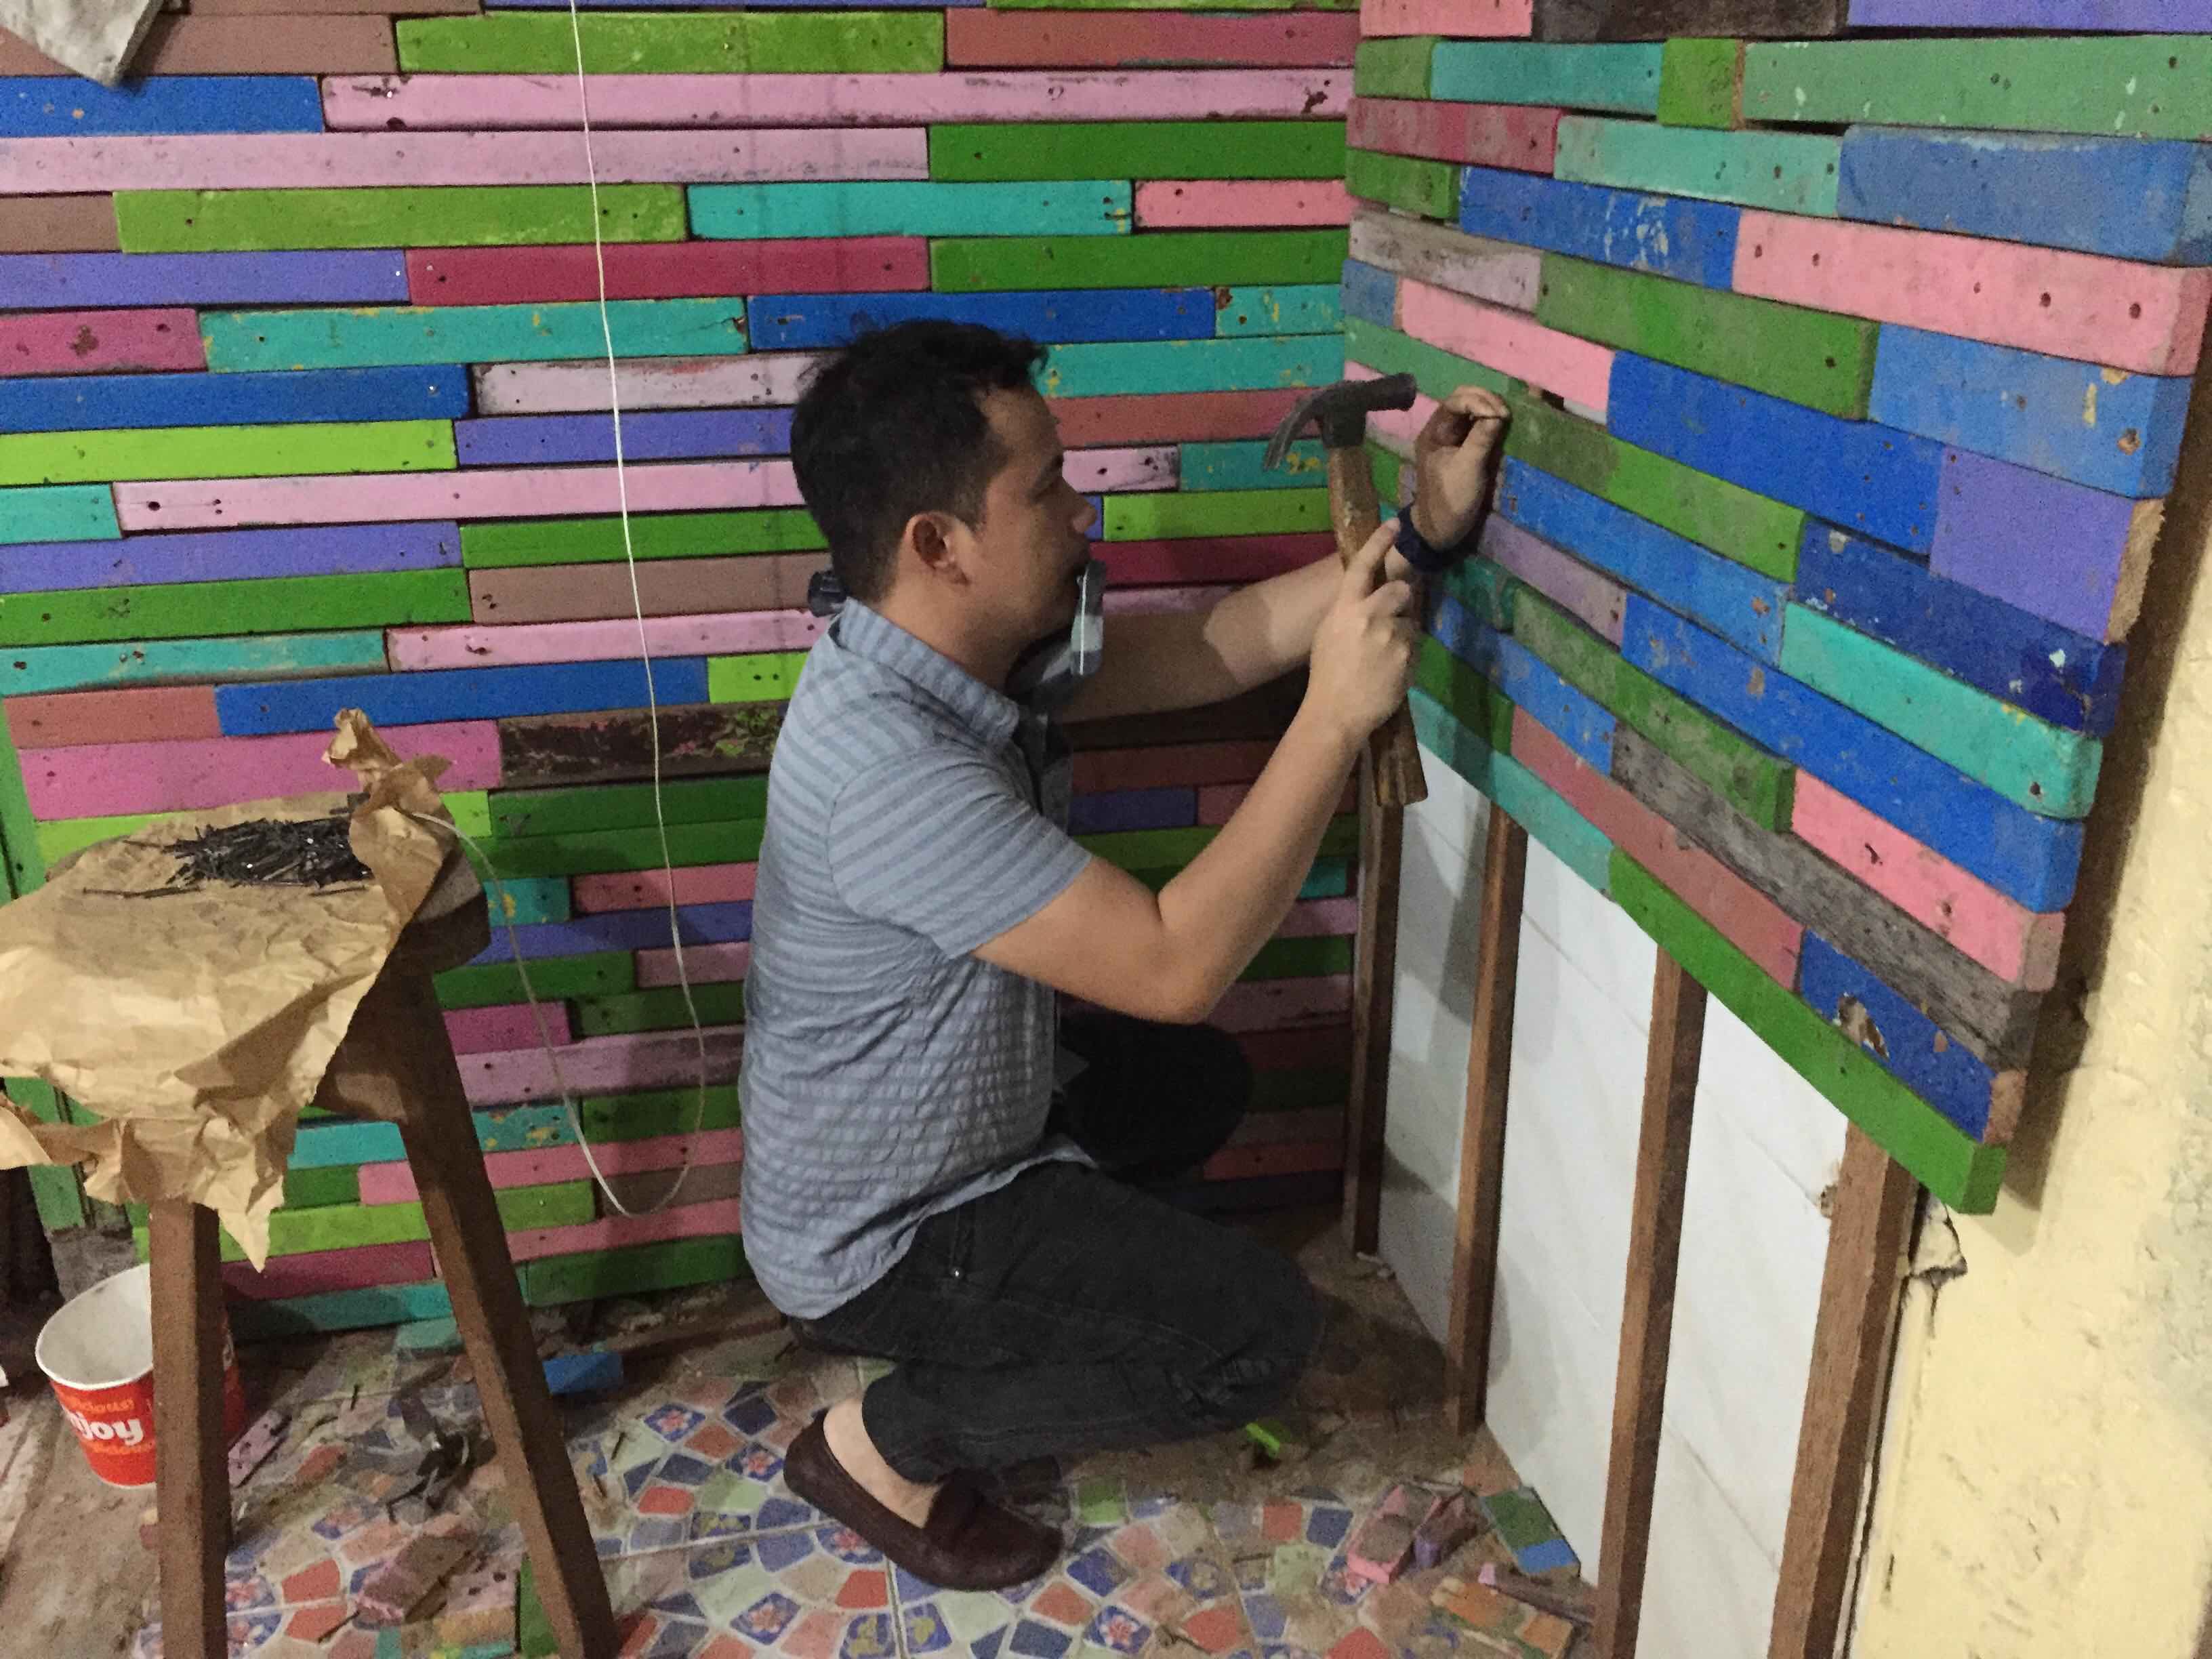 The teacher attaching the pieces of wood to the wall. (Photo: Reynel Calmerin)